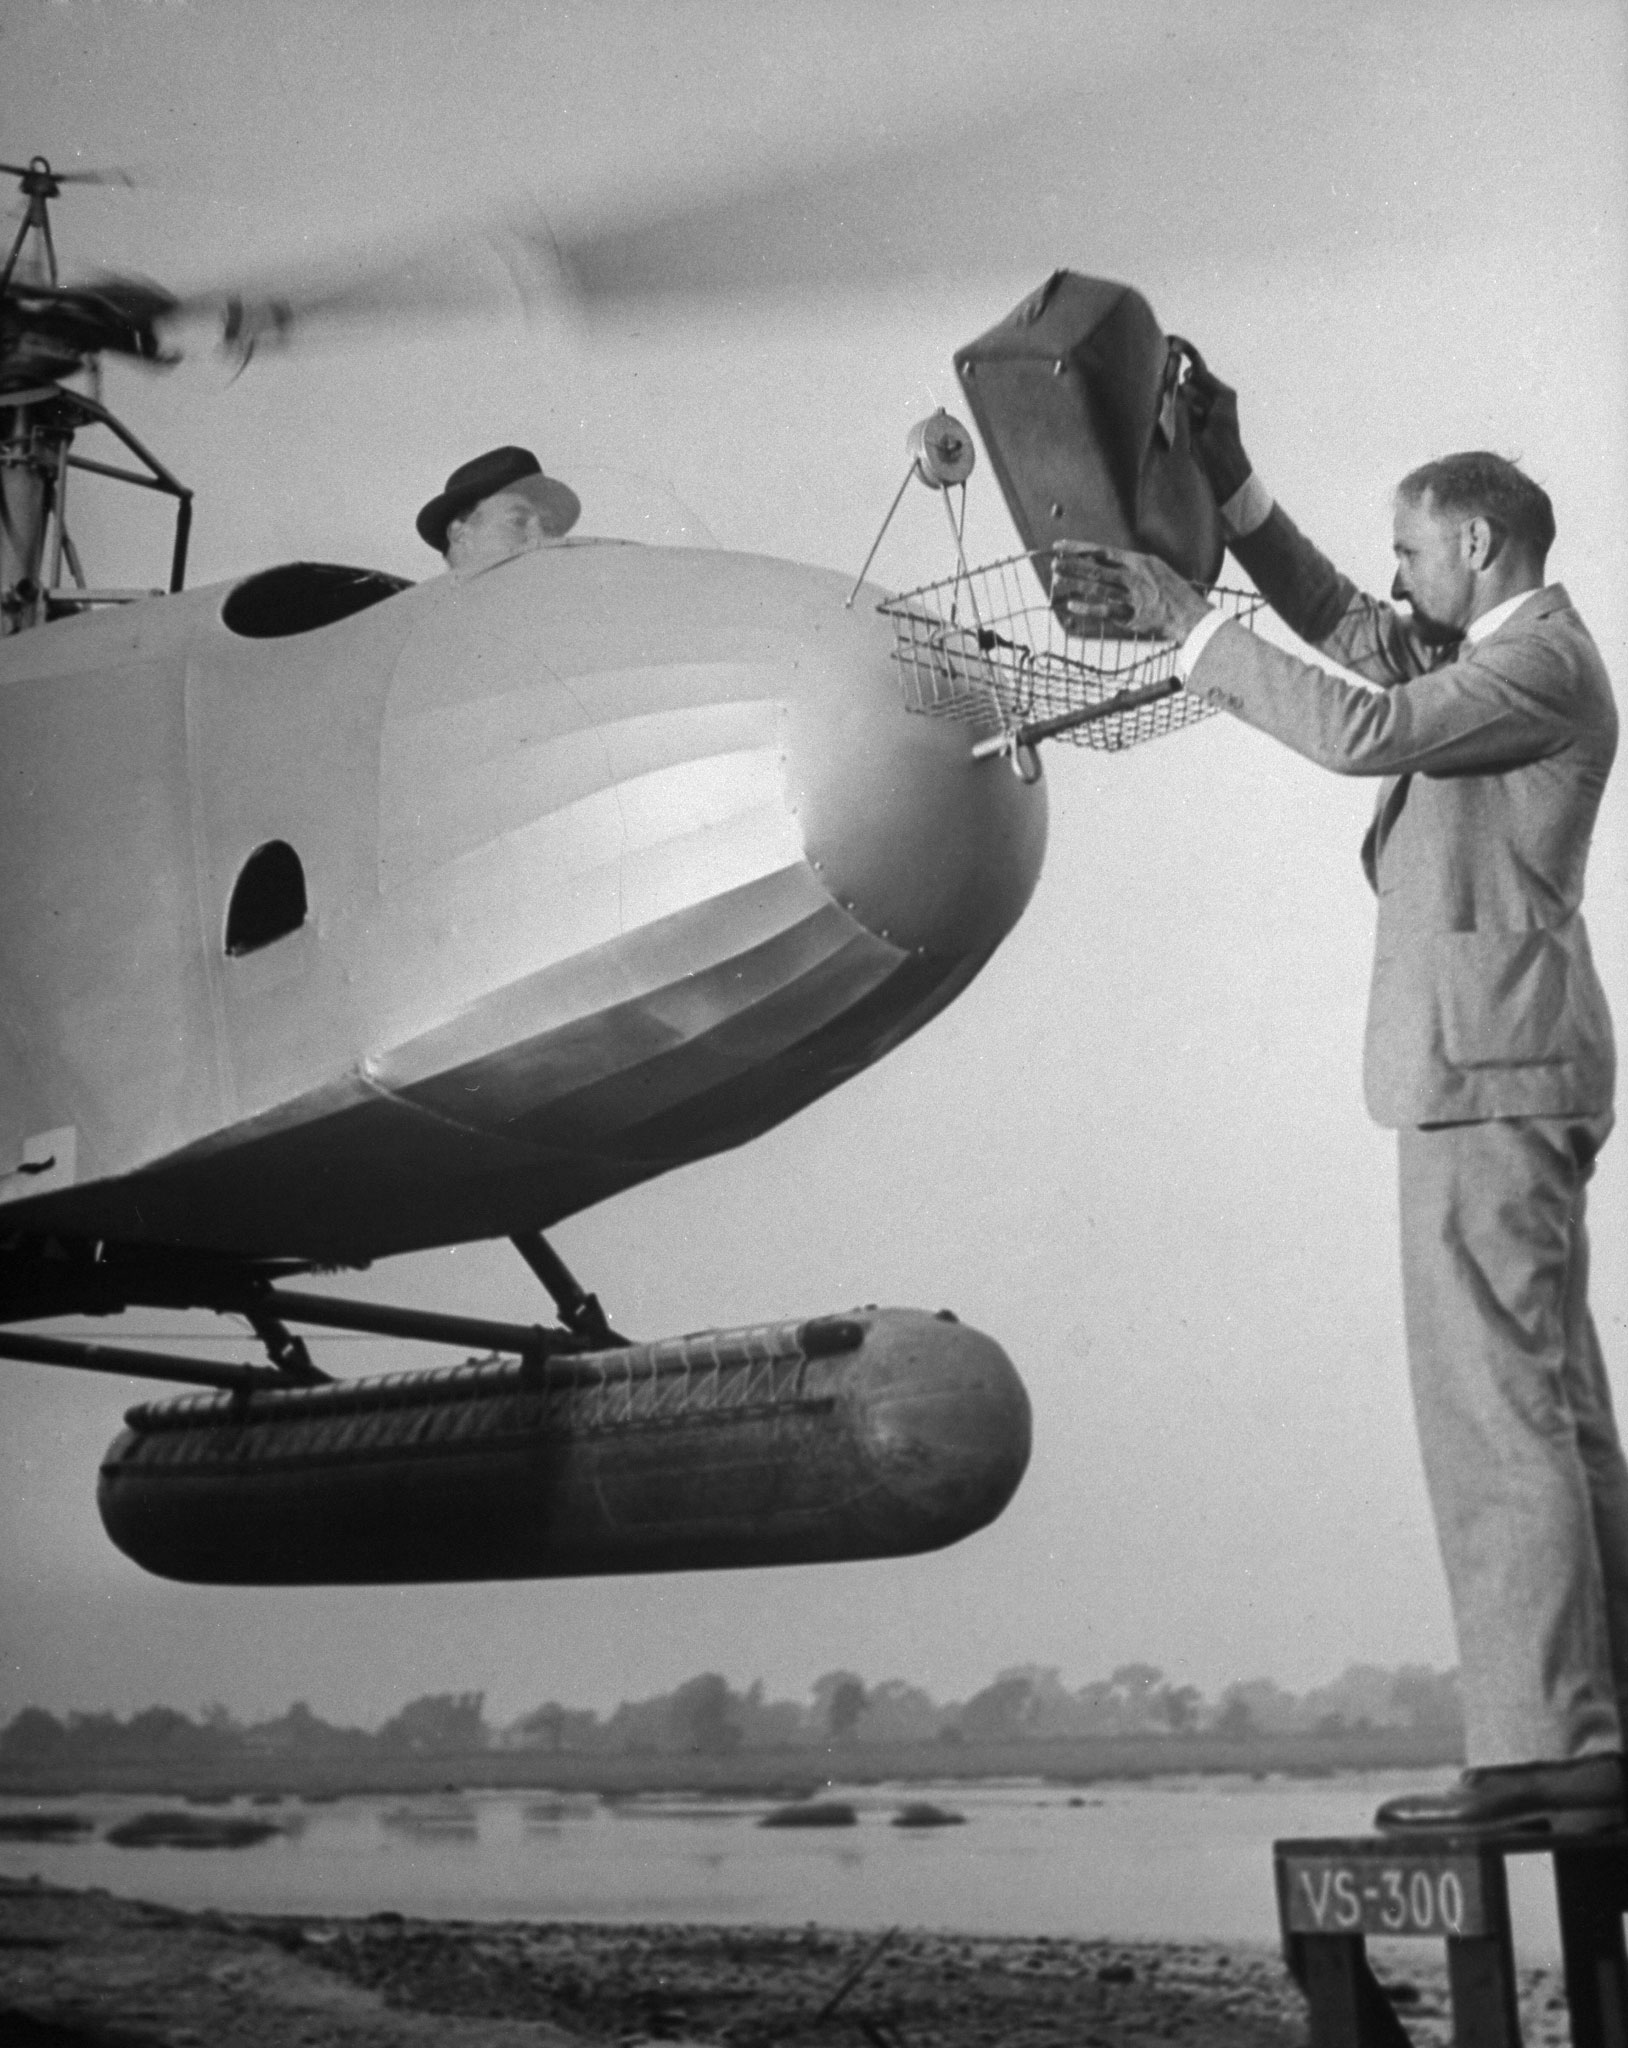 A man drops a briefcase into the basket on the nose of a helicopter, 1942.